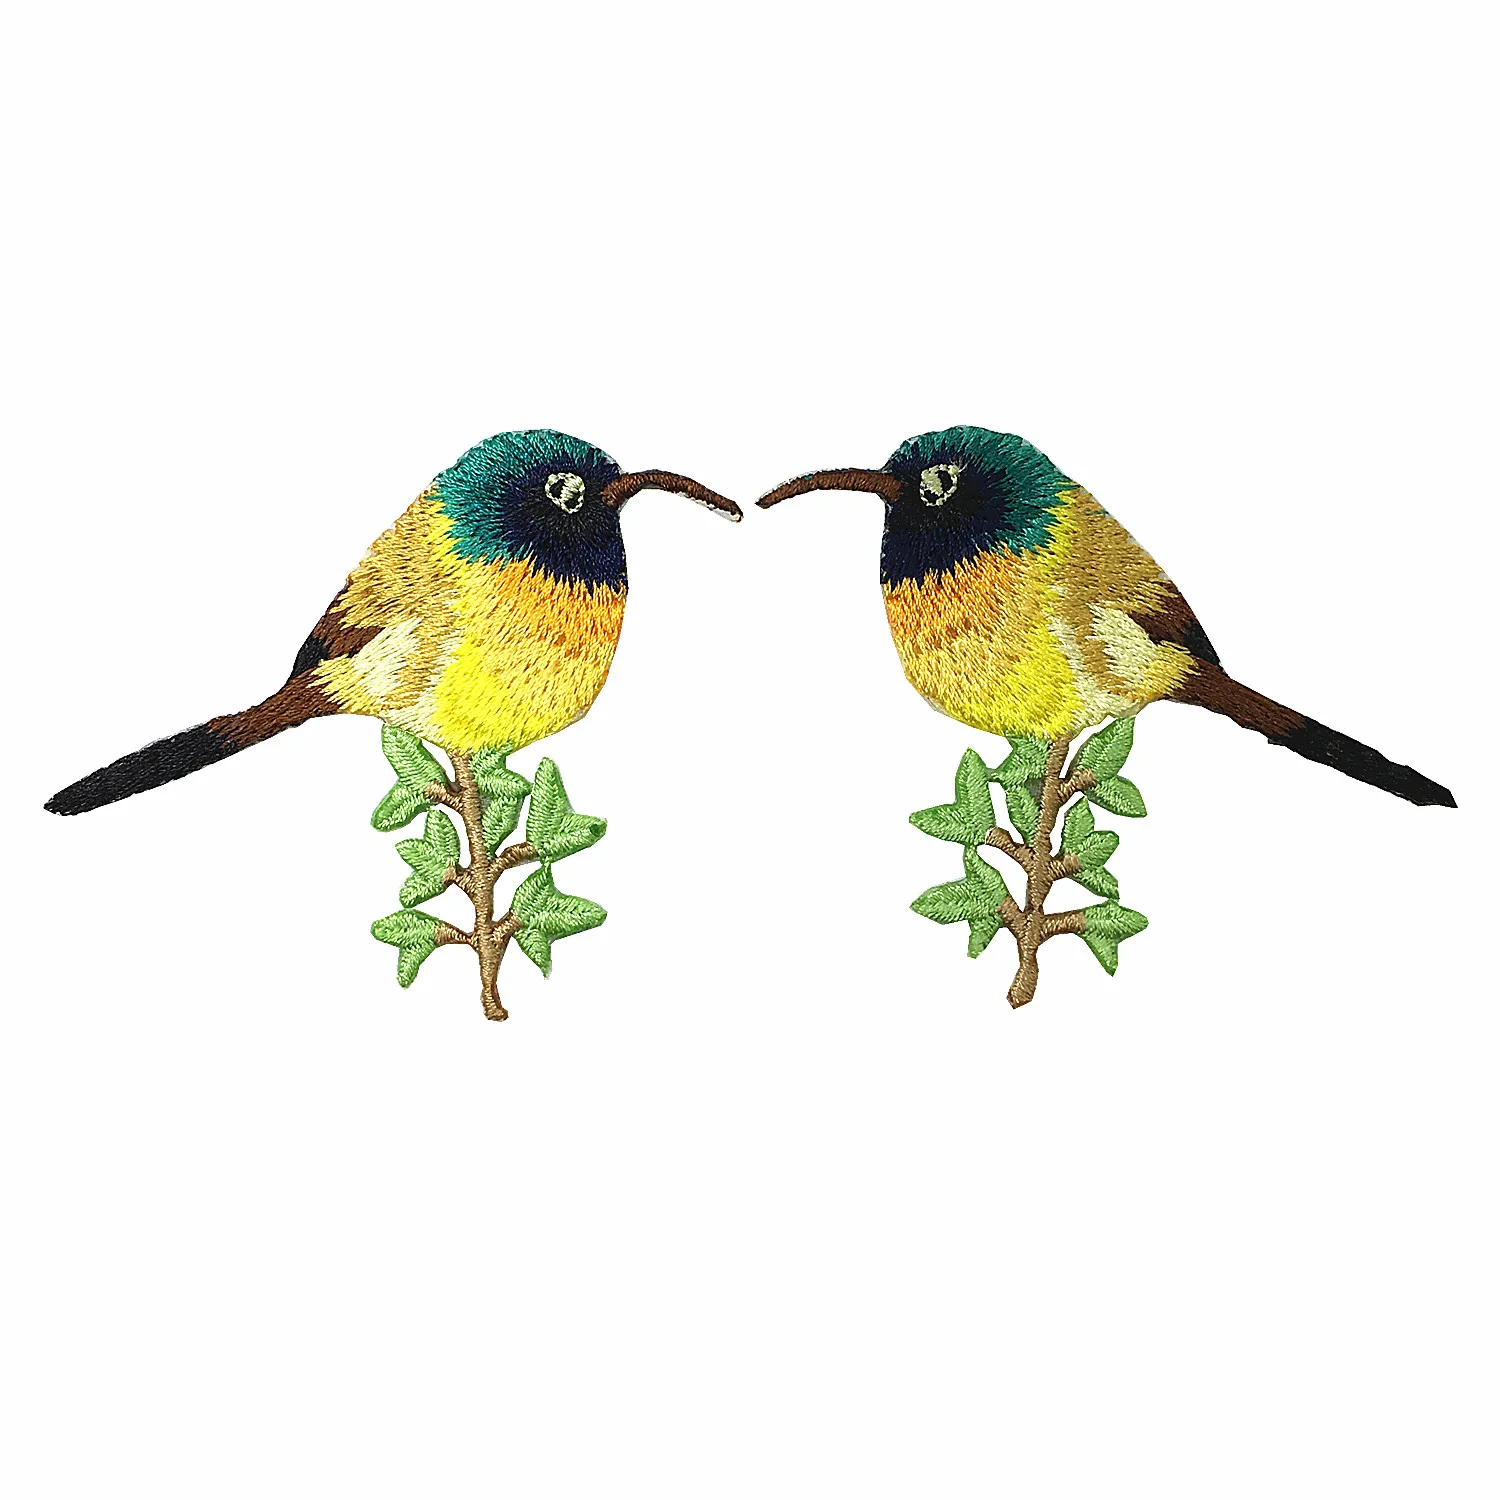 

7x6cm Iron On Embroidered Yellow Warbler Patch Birds Applique Embroidery Patches For Clothing Parches Bordados AC0930